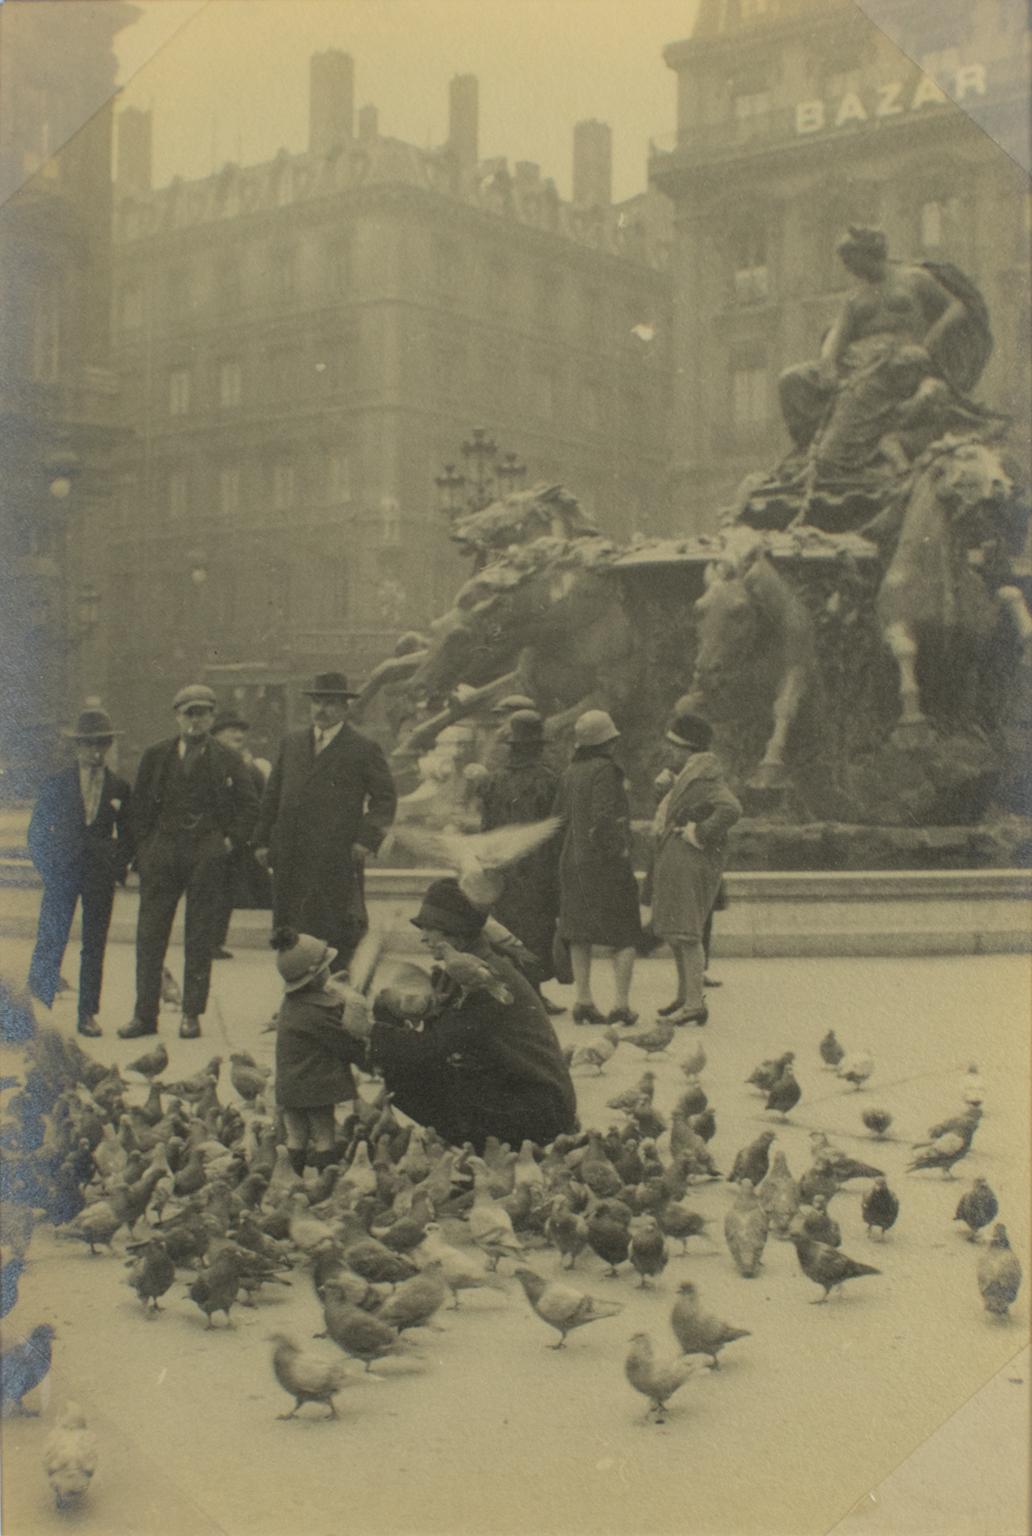 A unique original silver gelatin black and white photography, Place des Renaux in Lyon, France, March 1927. 
The photograph presents a view of Place des Renaux in Lyon, France, with a woman and child feeding pigeons, dated March 9,